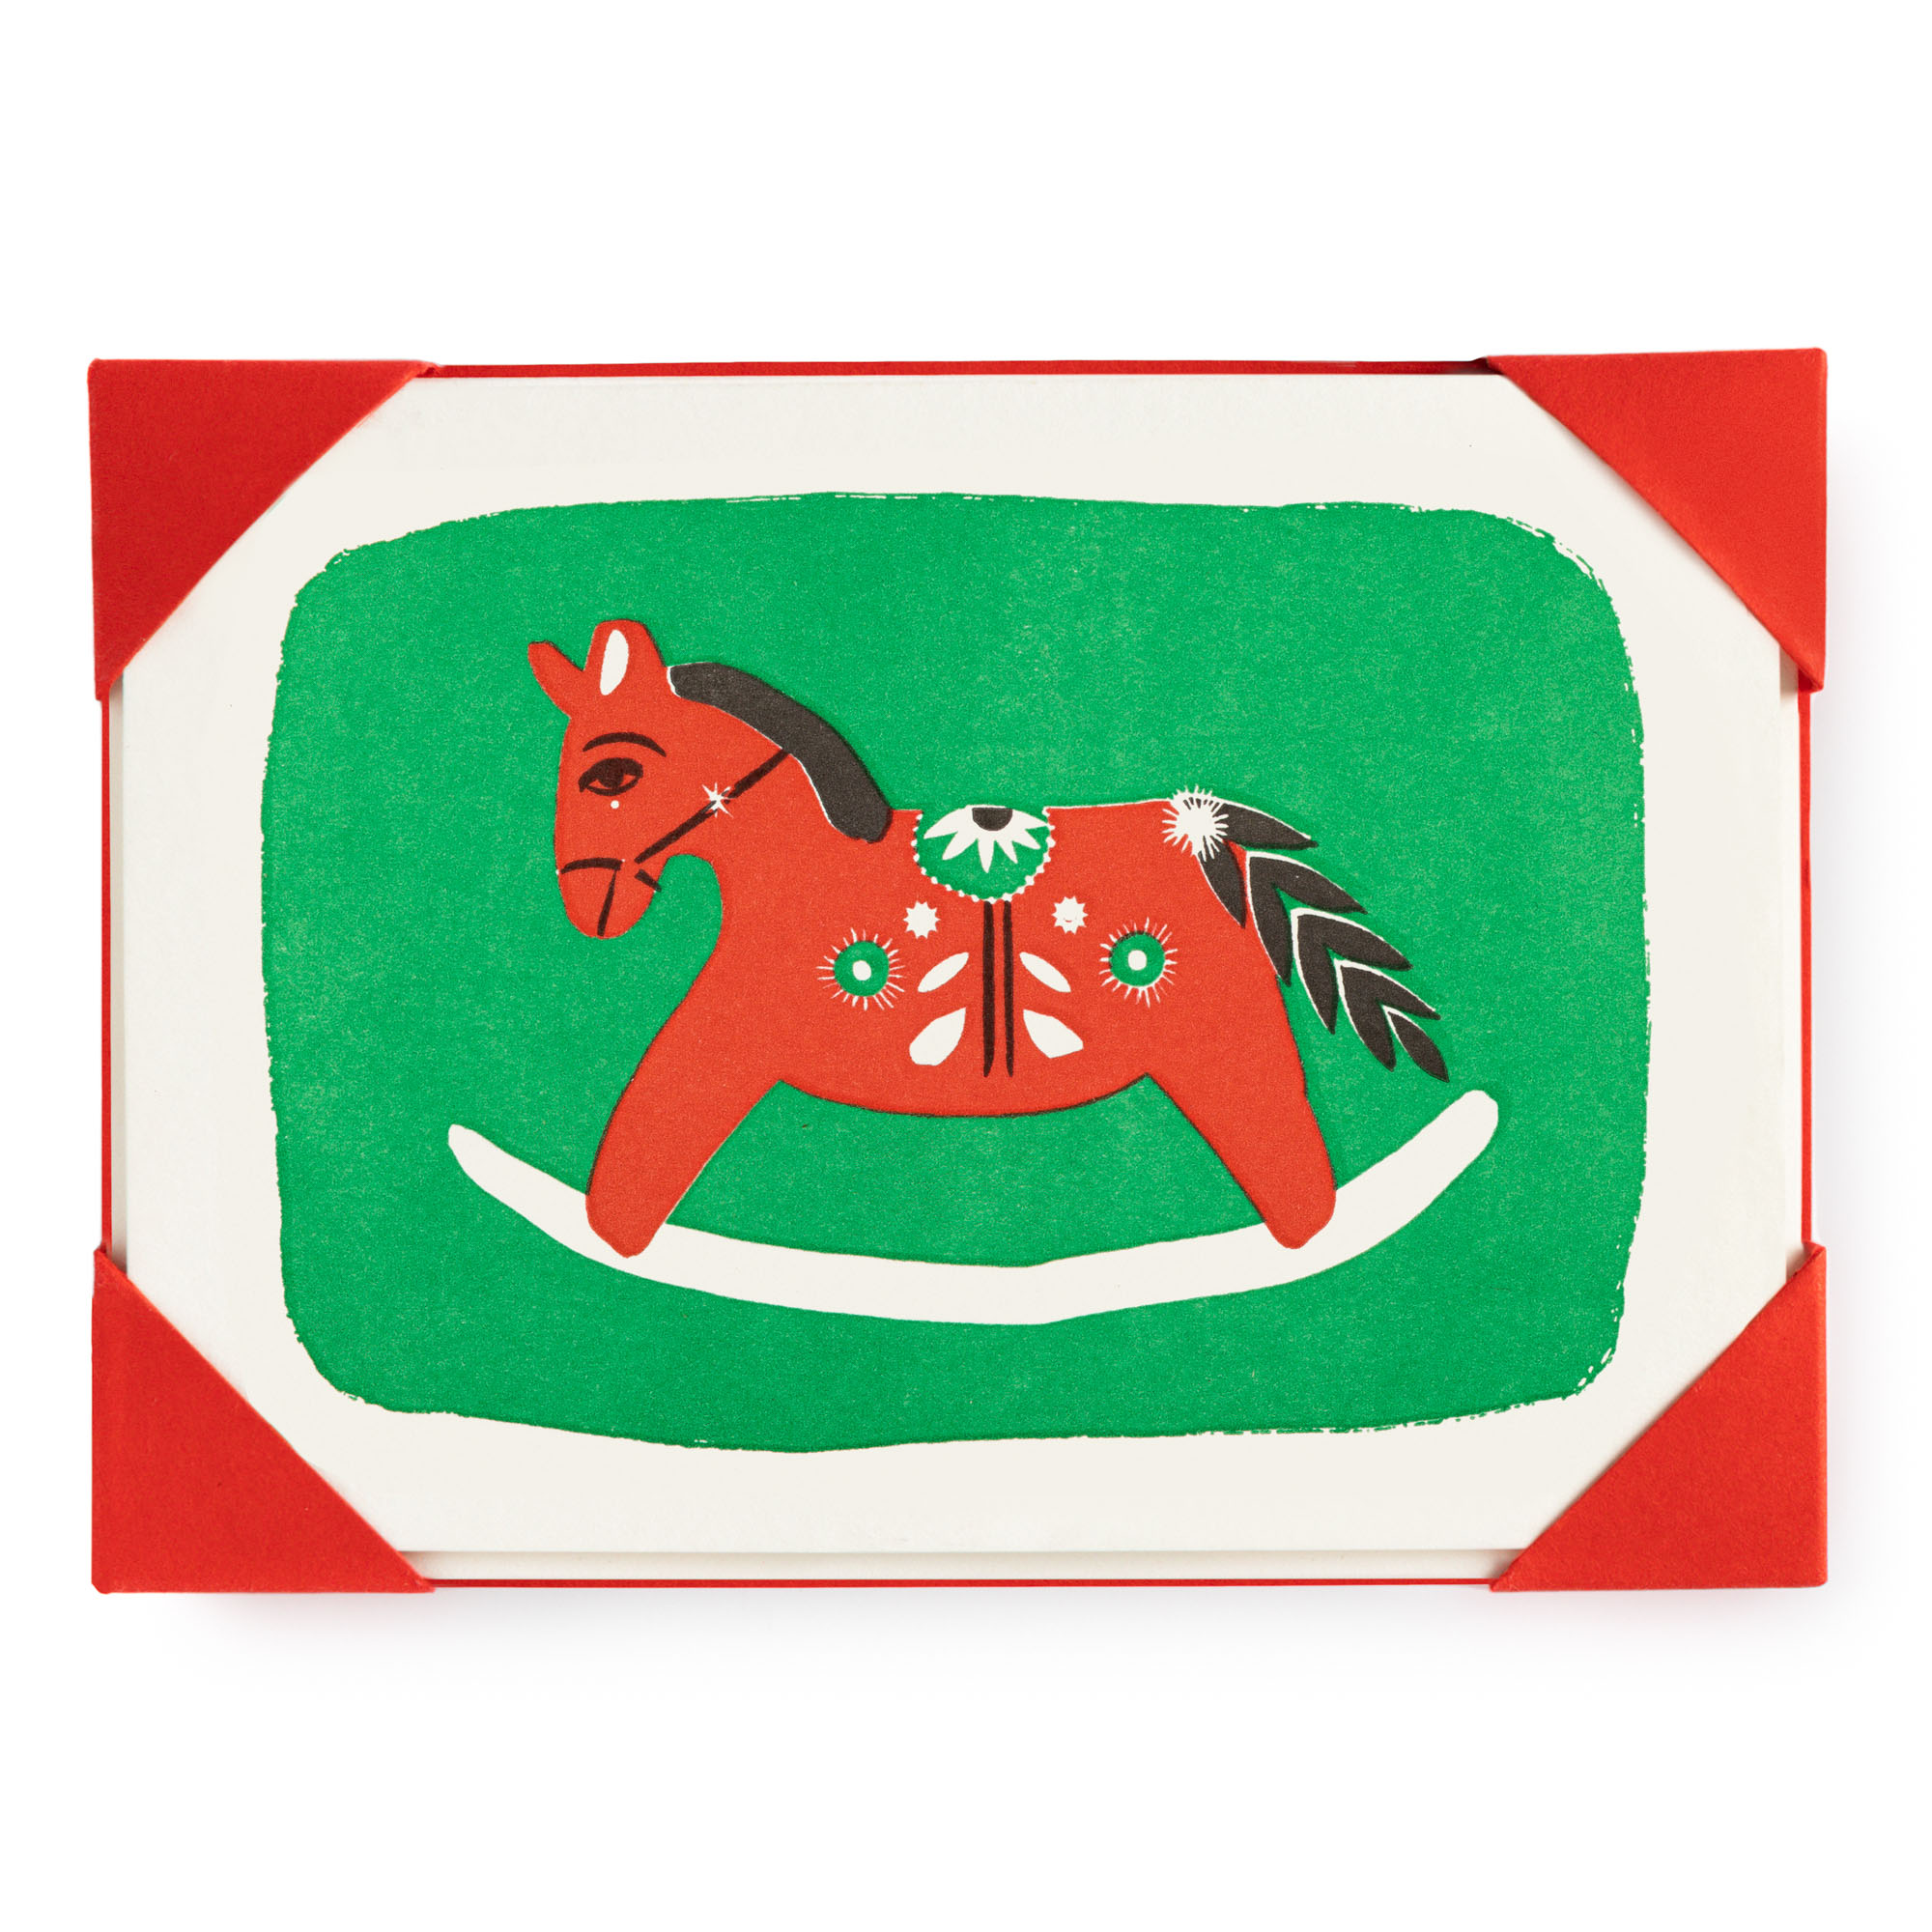 Festive Rocking Horse - Notelets Packs - Ariane Butto - from Archivist Gallery 